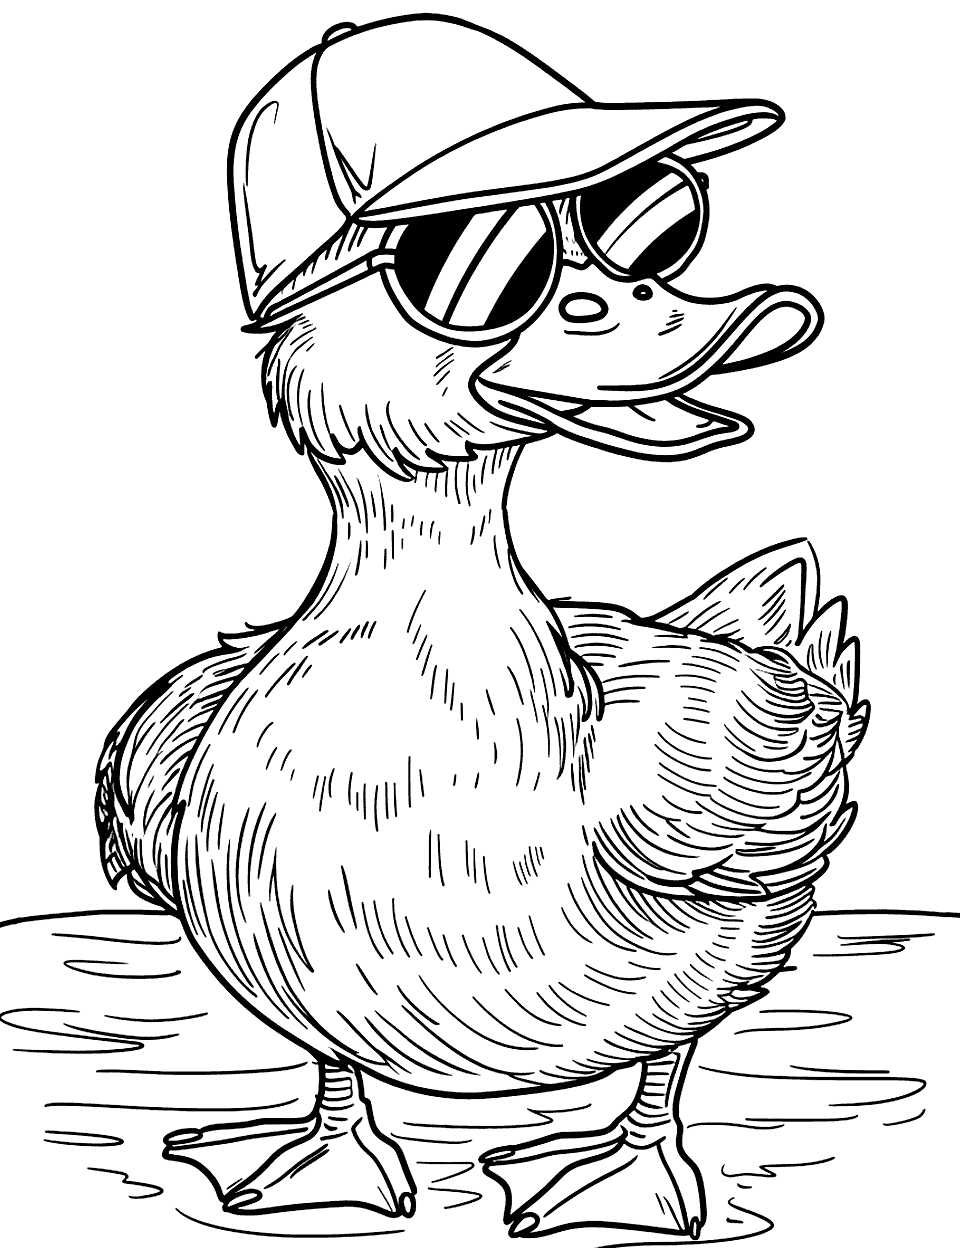 Cool Duck Wearing Sunglasses Coloring Page - A cool duck wearing sunglasses and a backward cap, looking ready for summer.